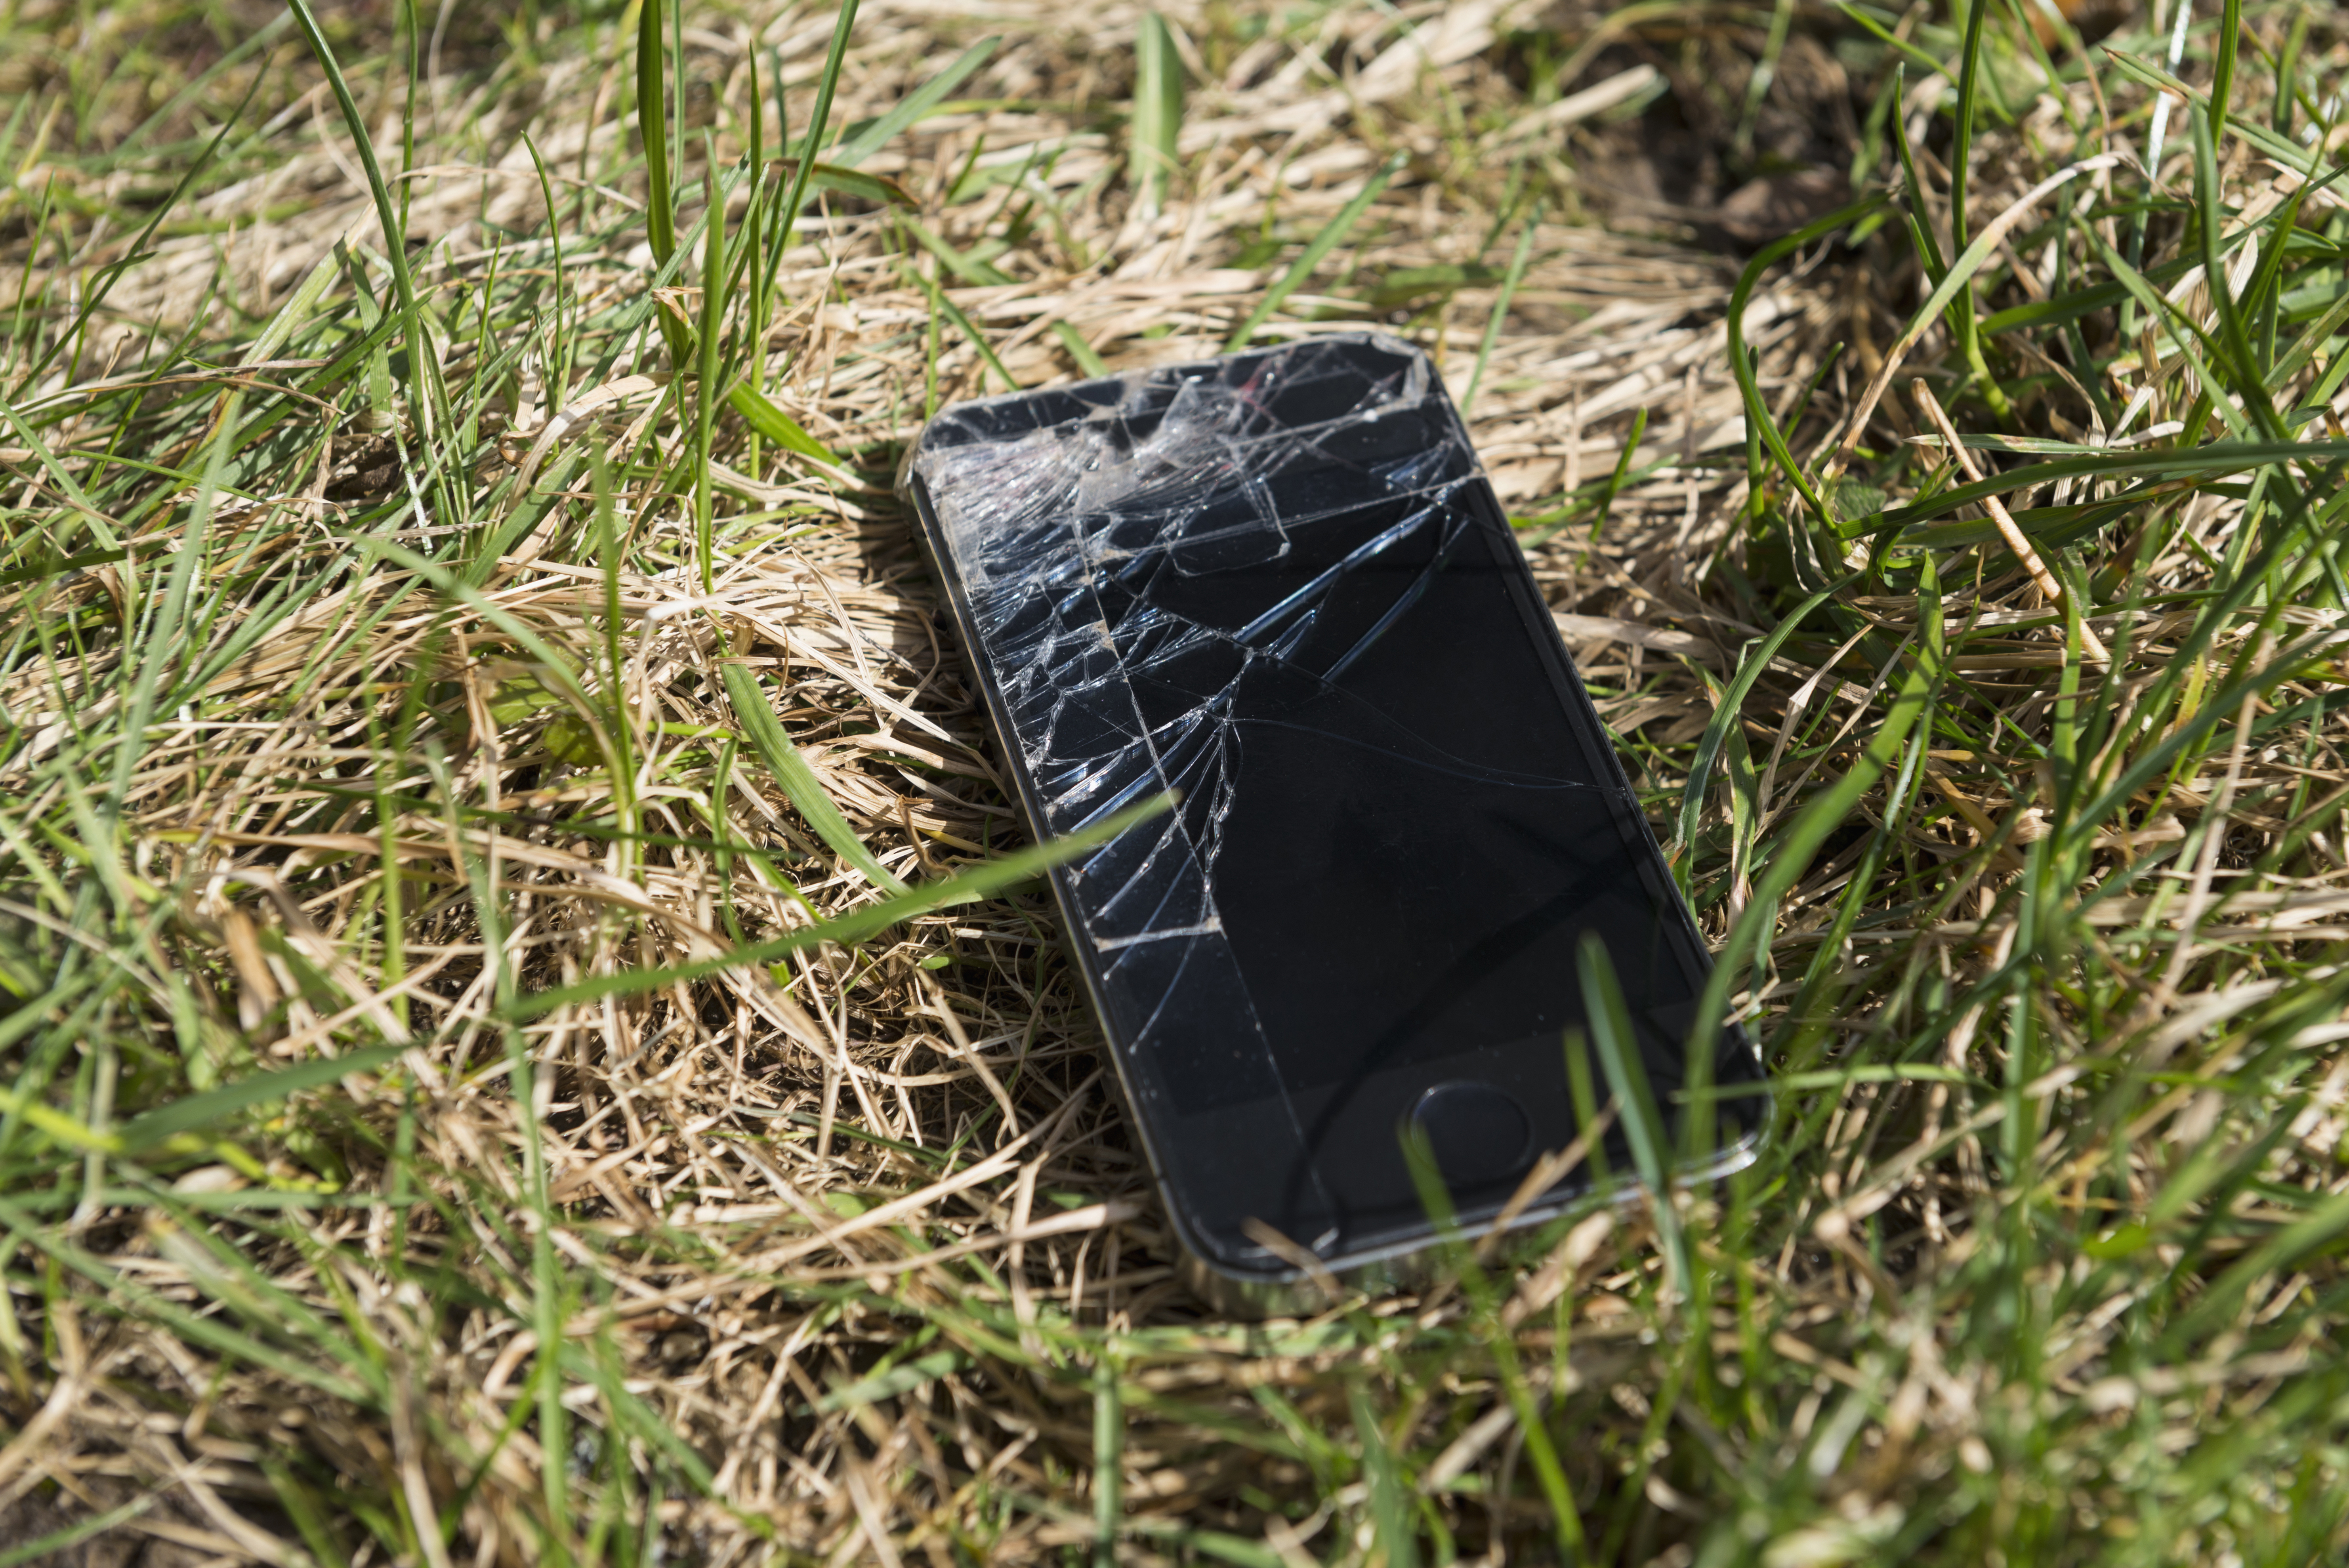 A shattered smartphone lying in a patch of grass.